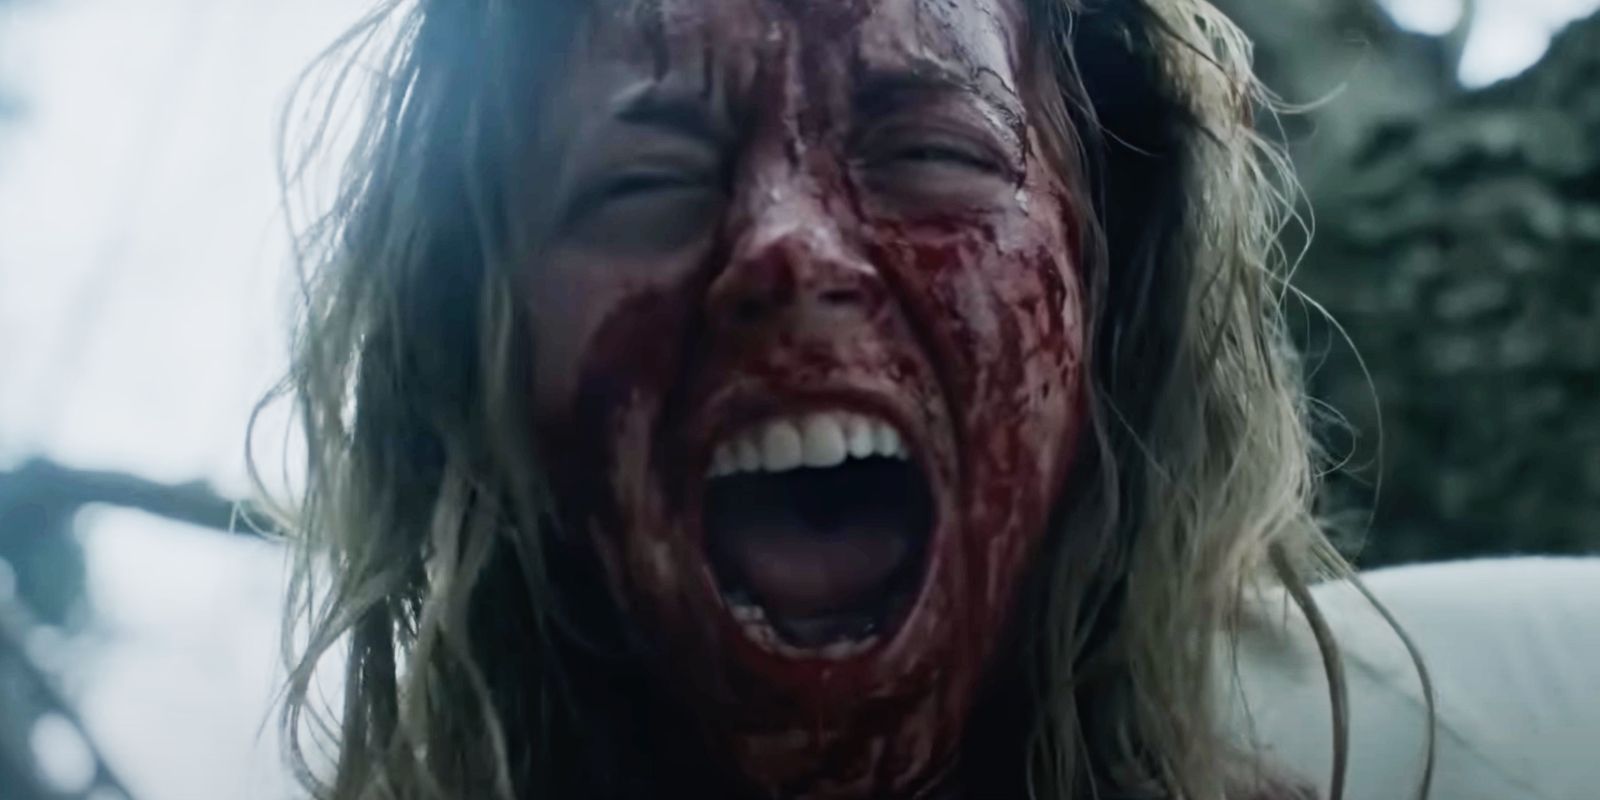 Sydney Sweeney as Cecilia screaming with blood on her face in Immaculate